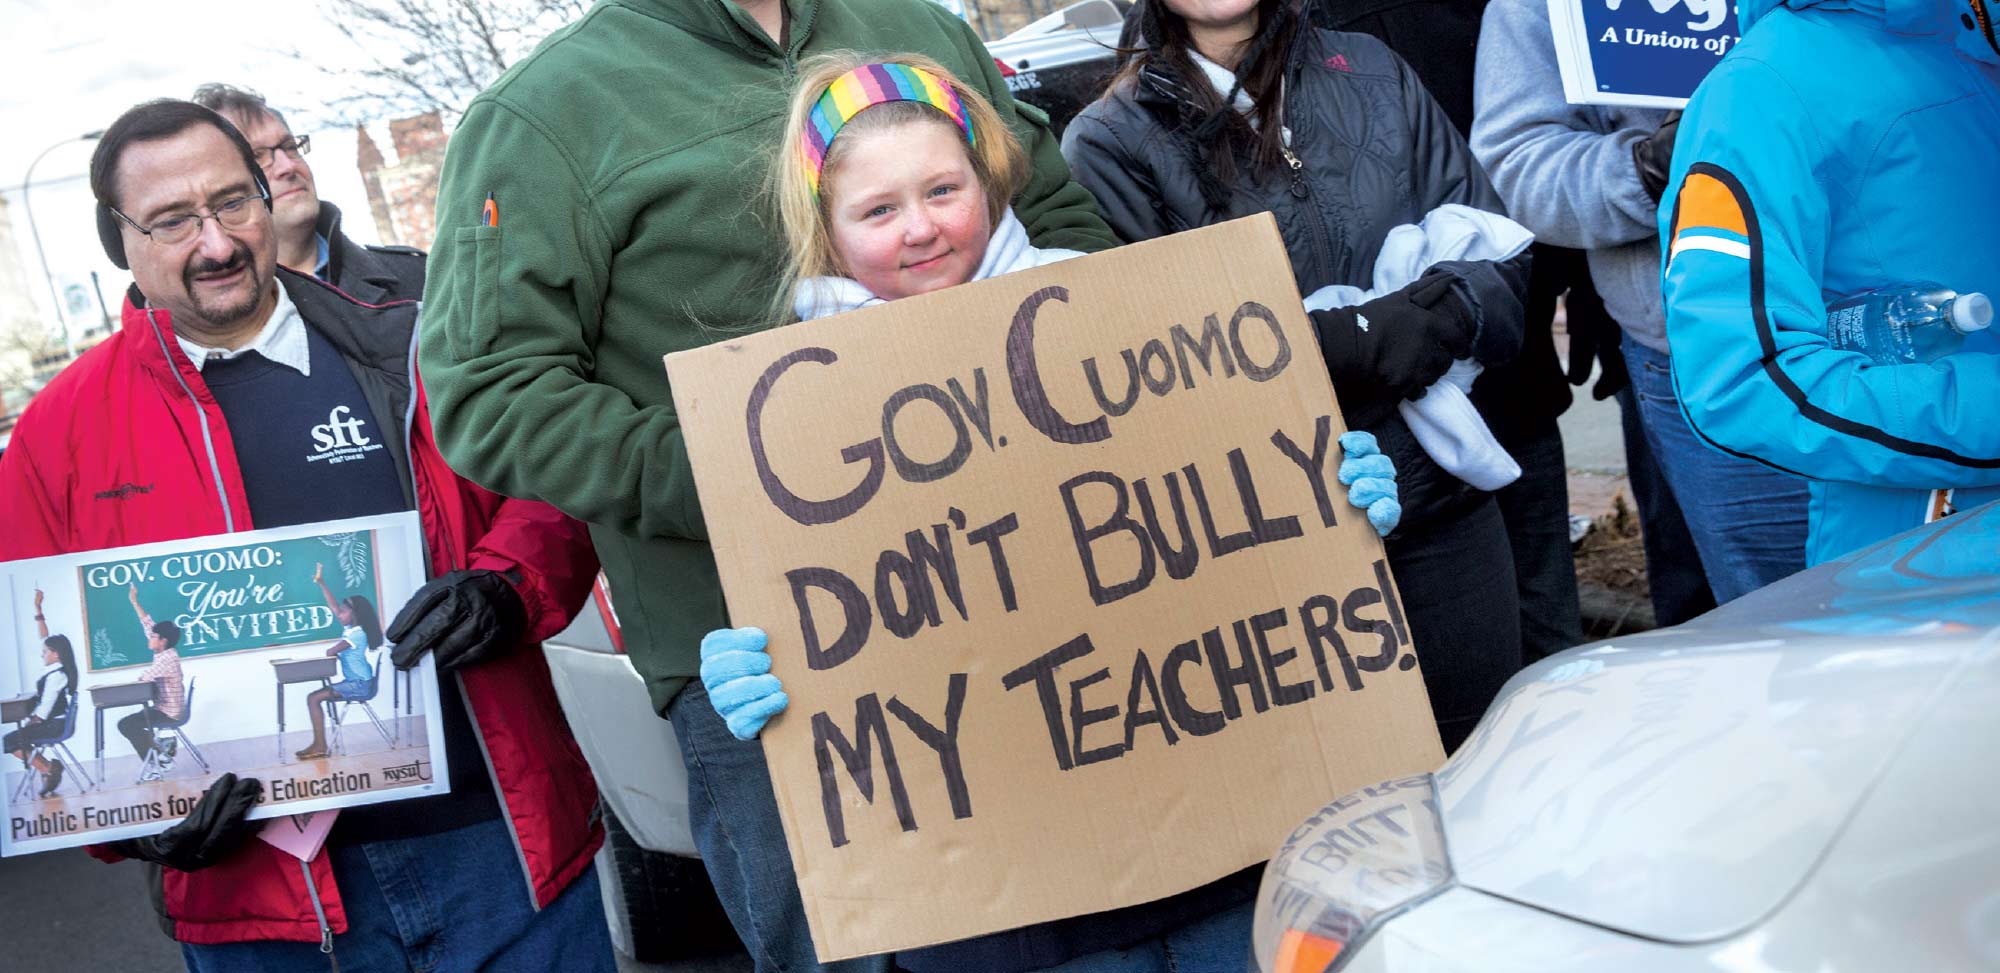 Close-up photograph perspective of a child holding a cardboard sign showing "Gov. Cuomo Don't Bully My Teachers" as she smiles in her cold weather attire while there are other people nearby her